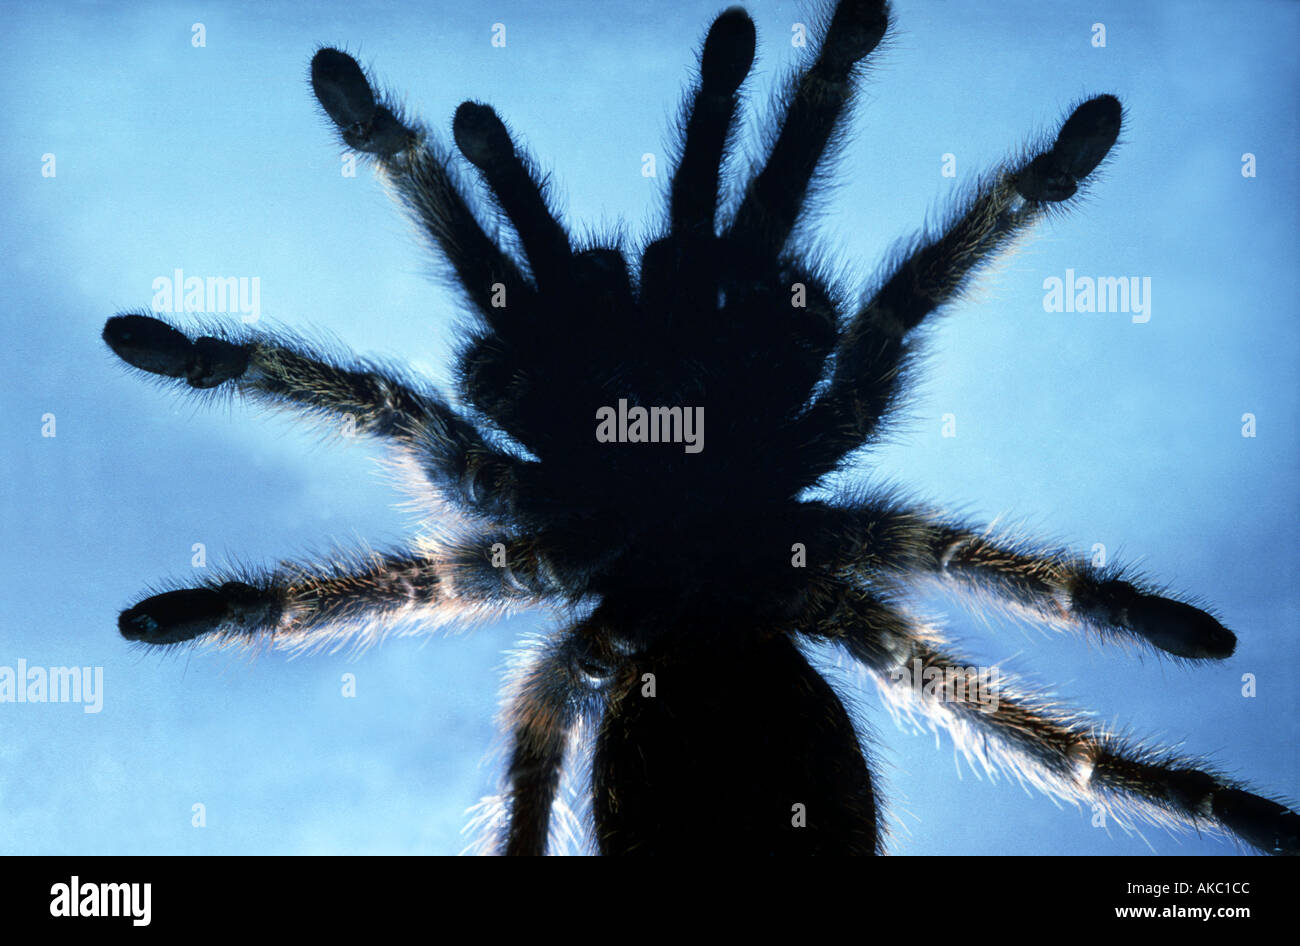 silhoutte of a giant spider THERAPHOSA LEBLONDI seen from below  Stock Photo